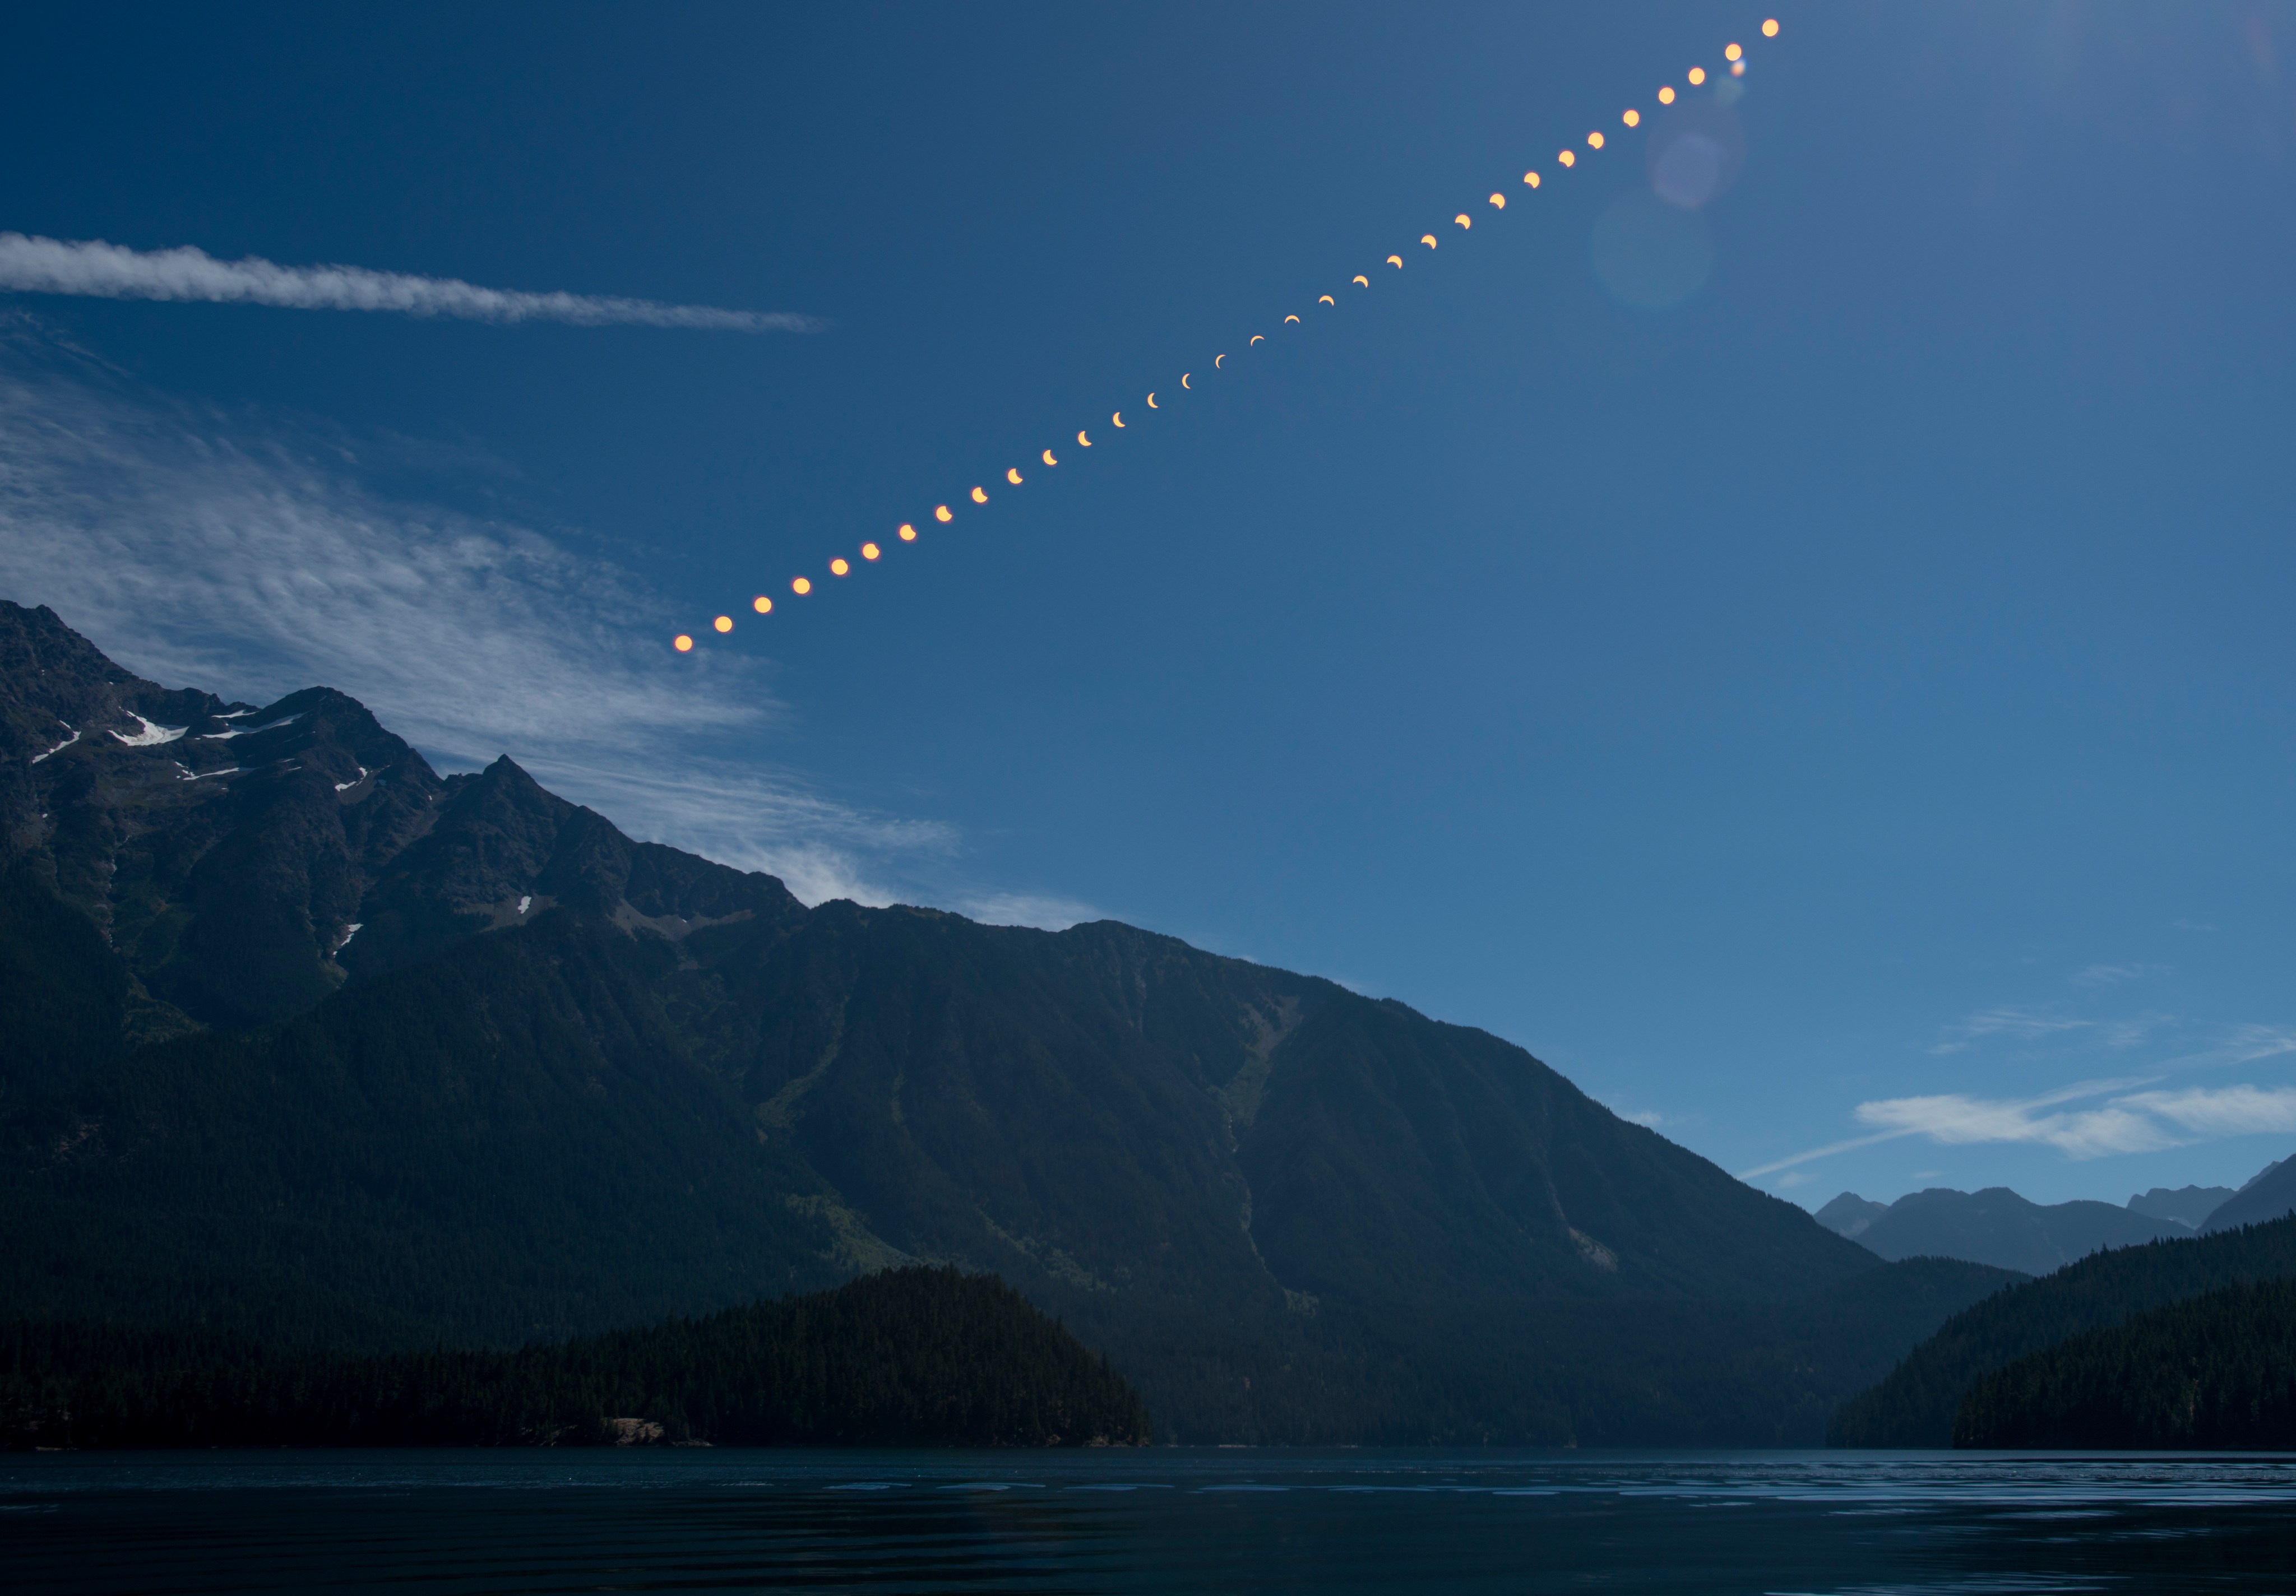 A composite image showing mountains above a lake and blue sky. In the sky is a total eclipse, progressing from a full Sun, to totality, and back to a full Sun again.